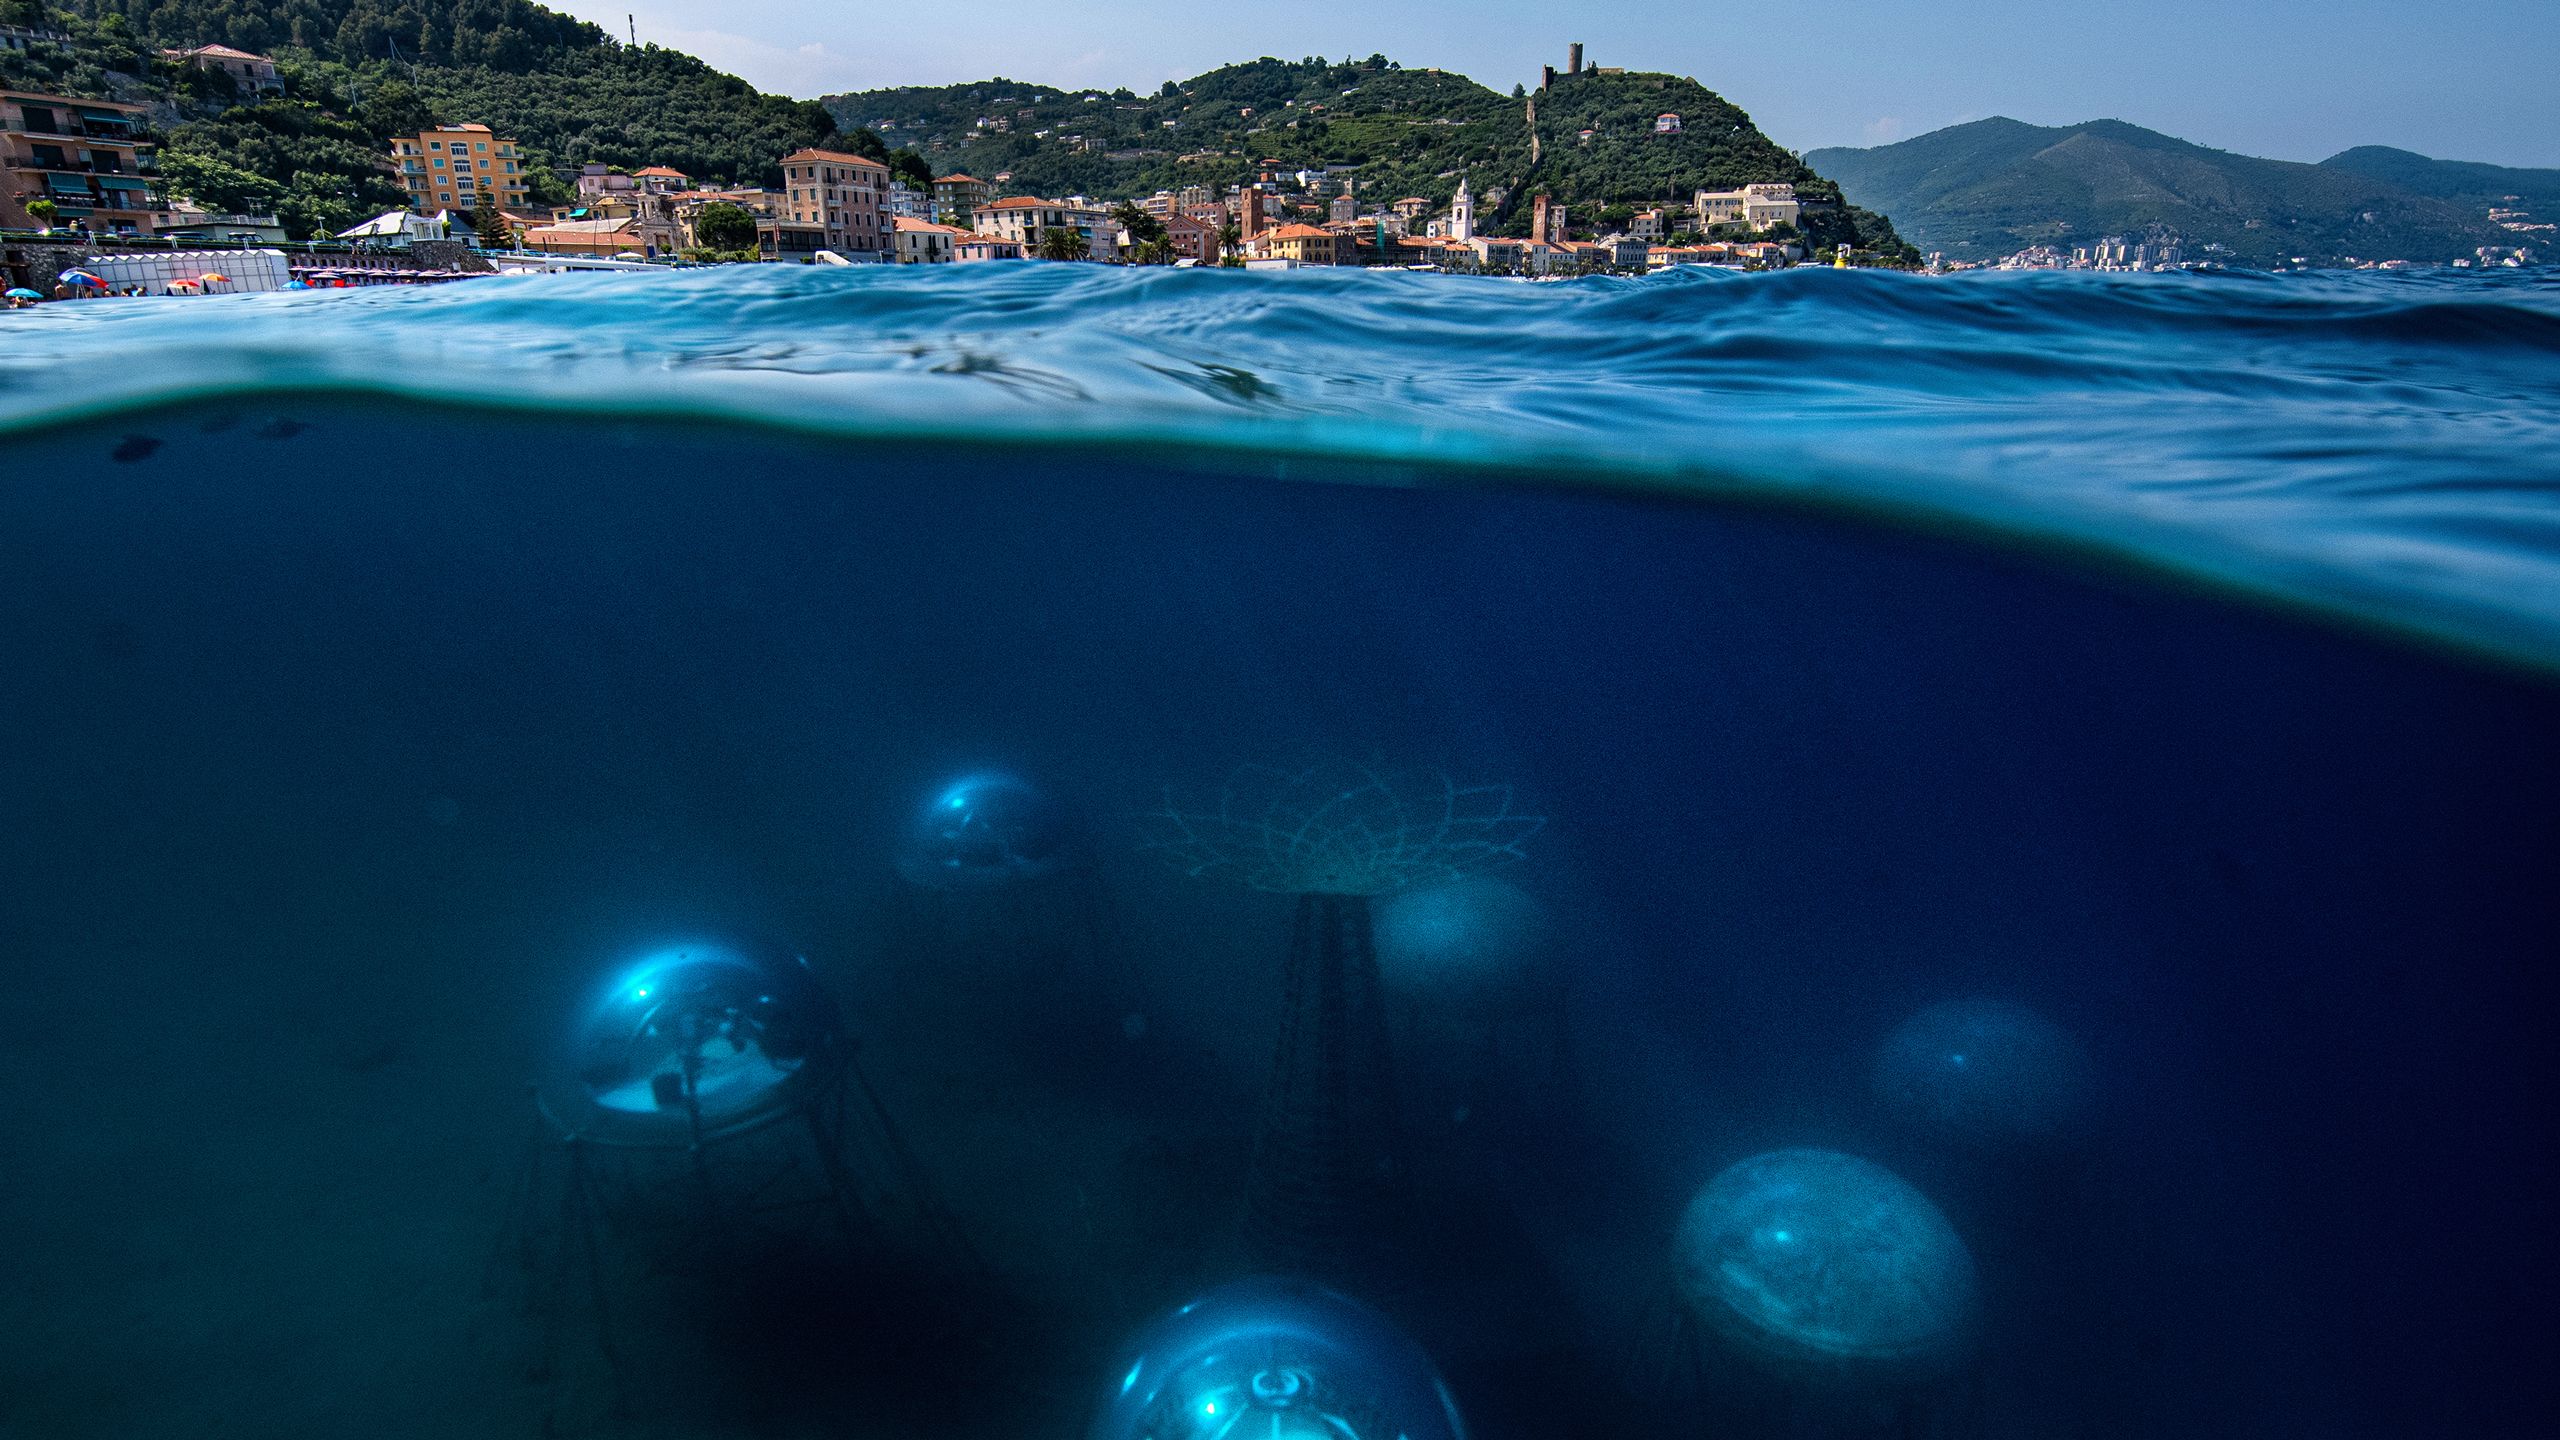 Nemo's Garden seen from the water’s surface. The biospheres are located 40 metres off the Noli shore – a small village on the Ligurian coast. 